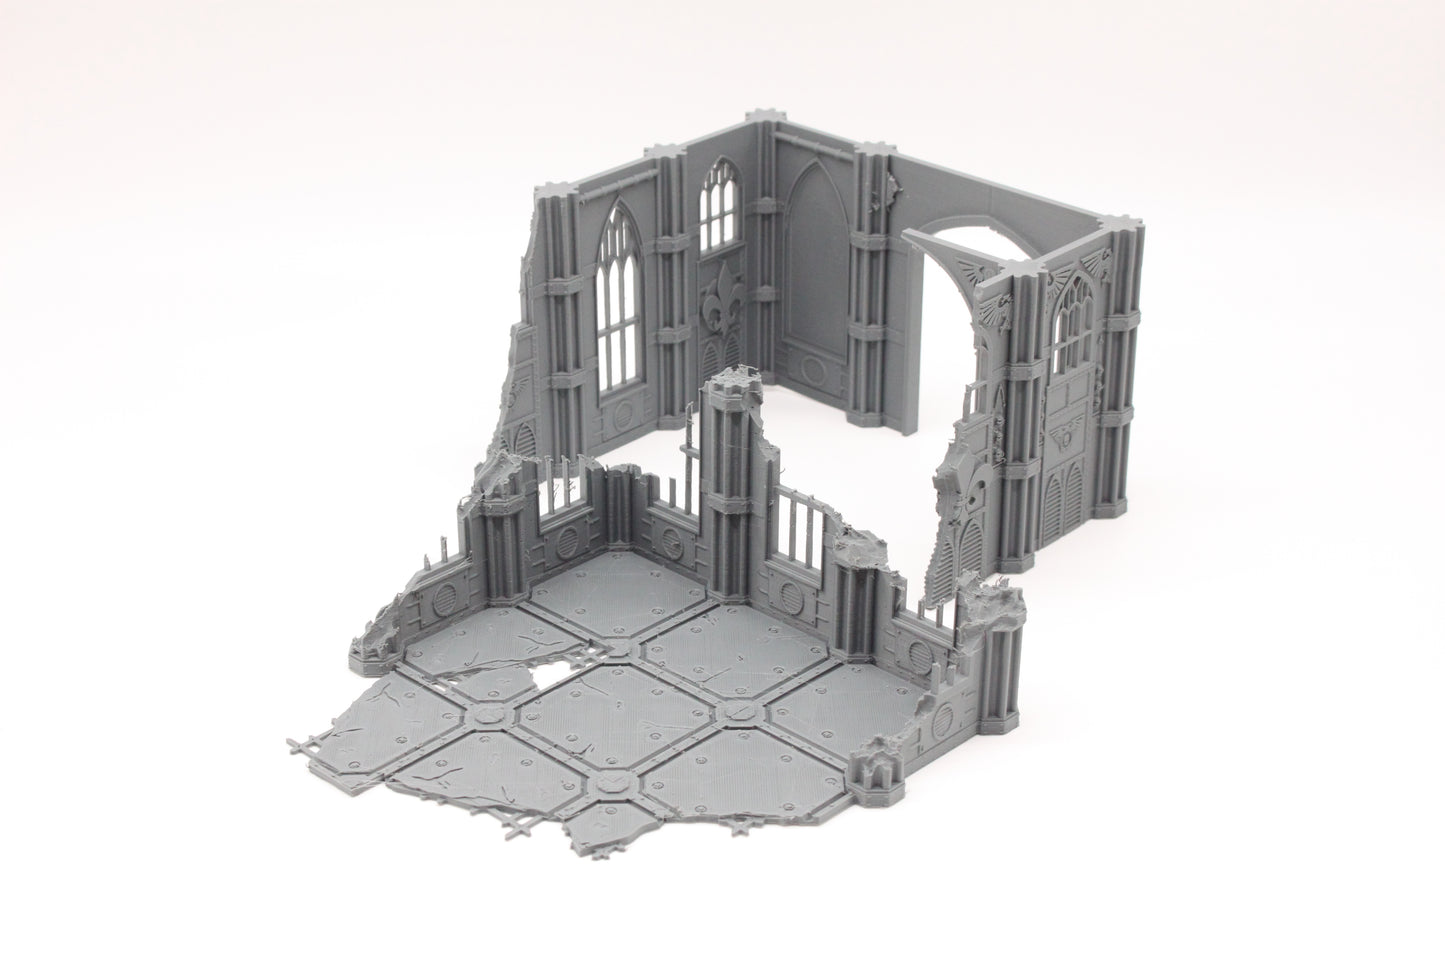 Bundle 4 of Gothic Ruined Buildings